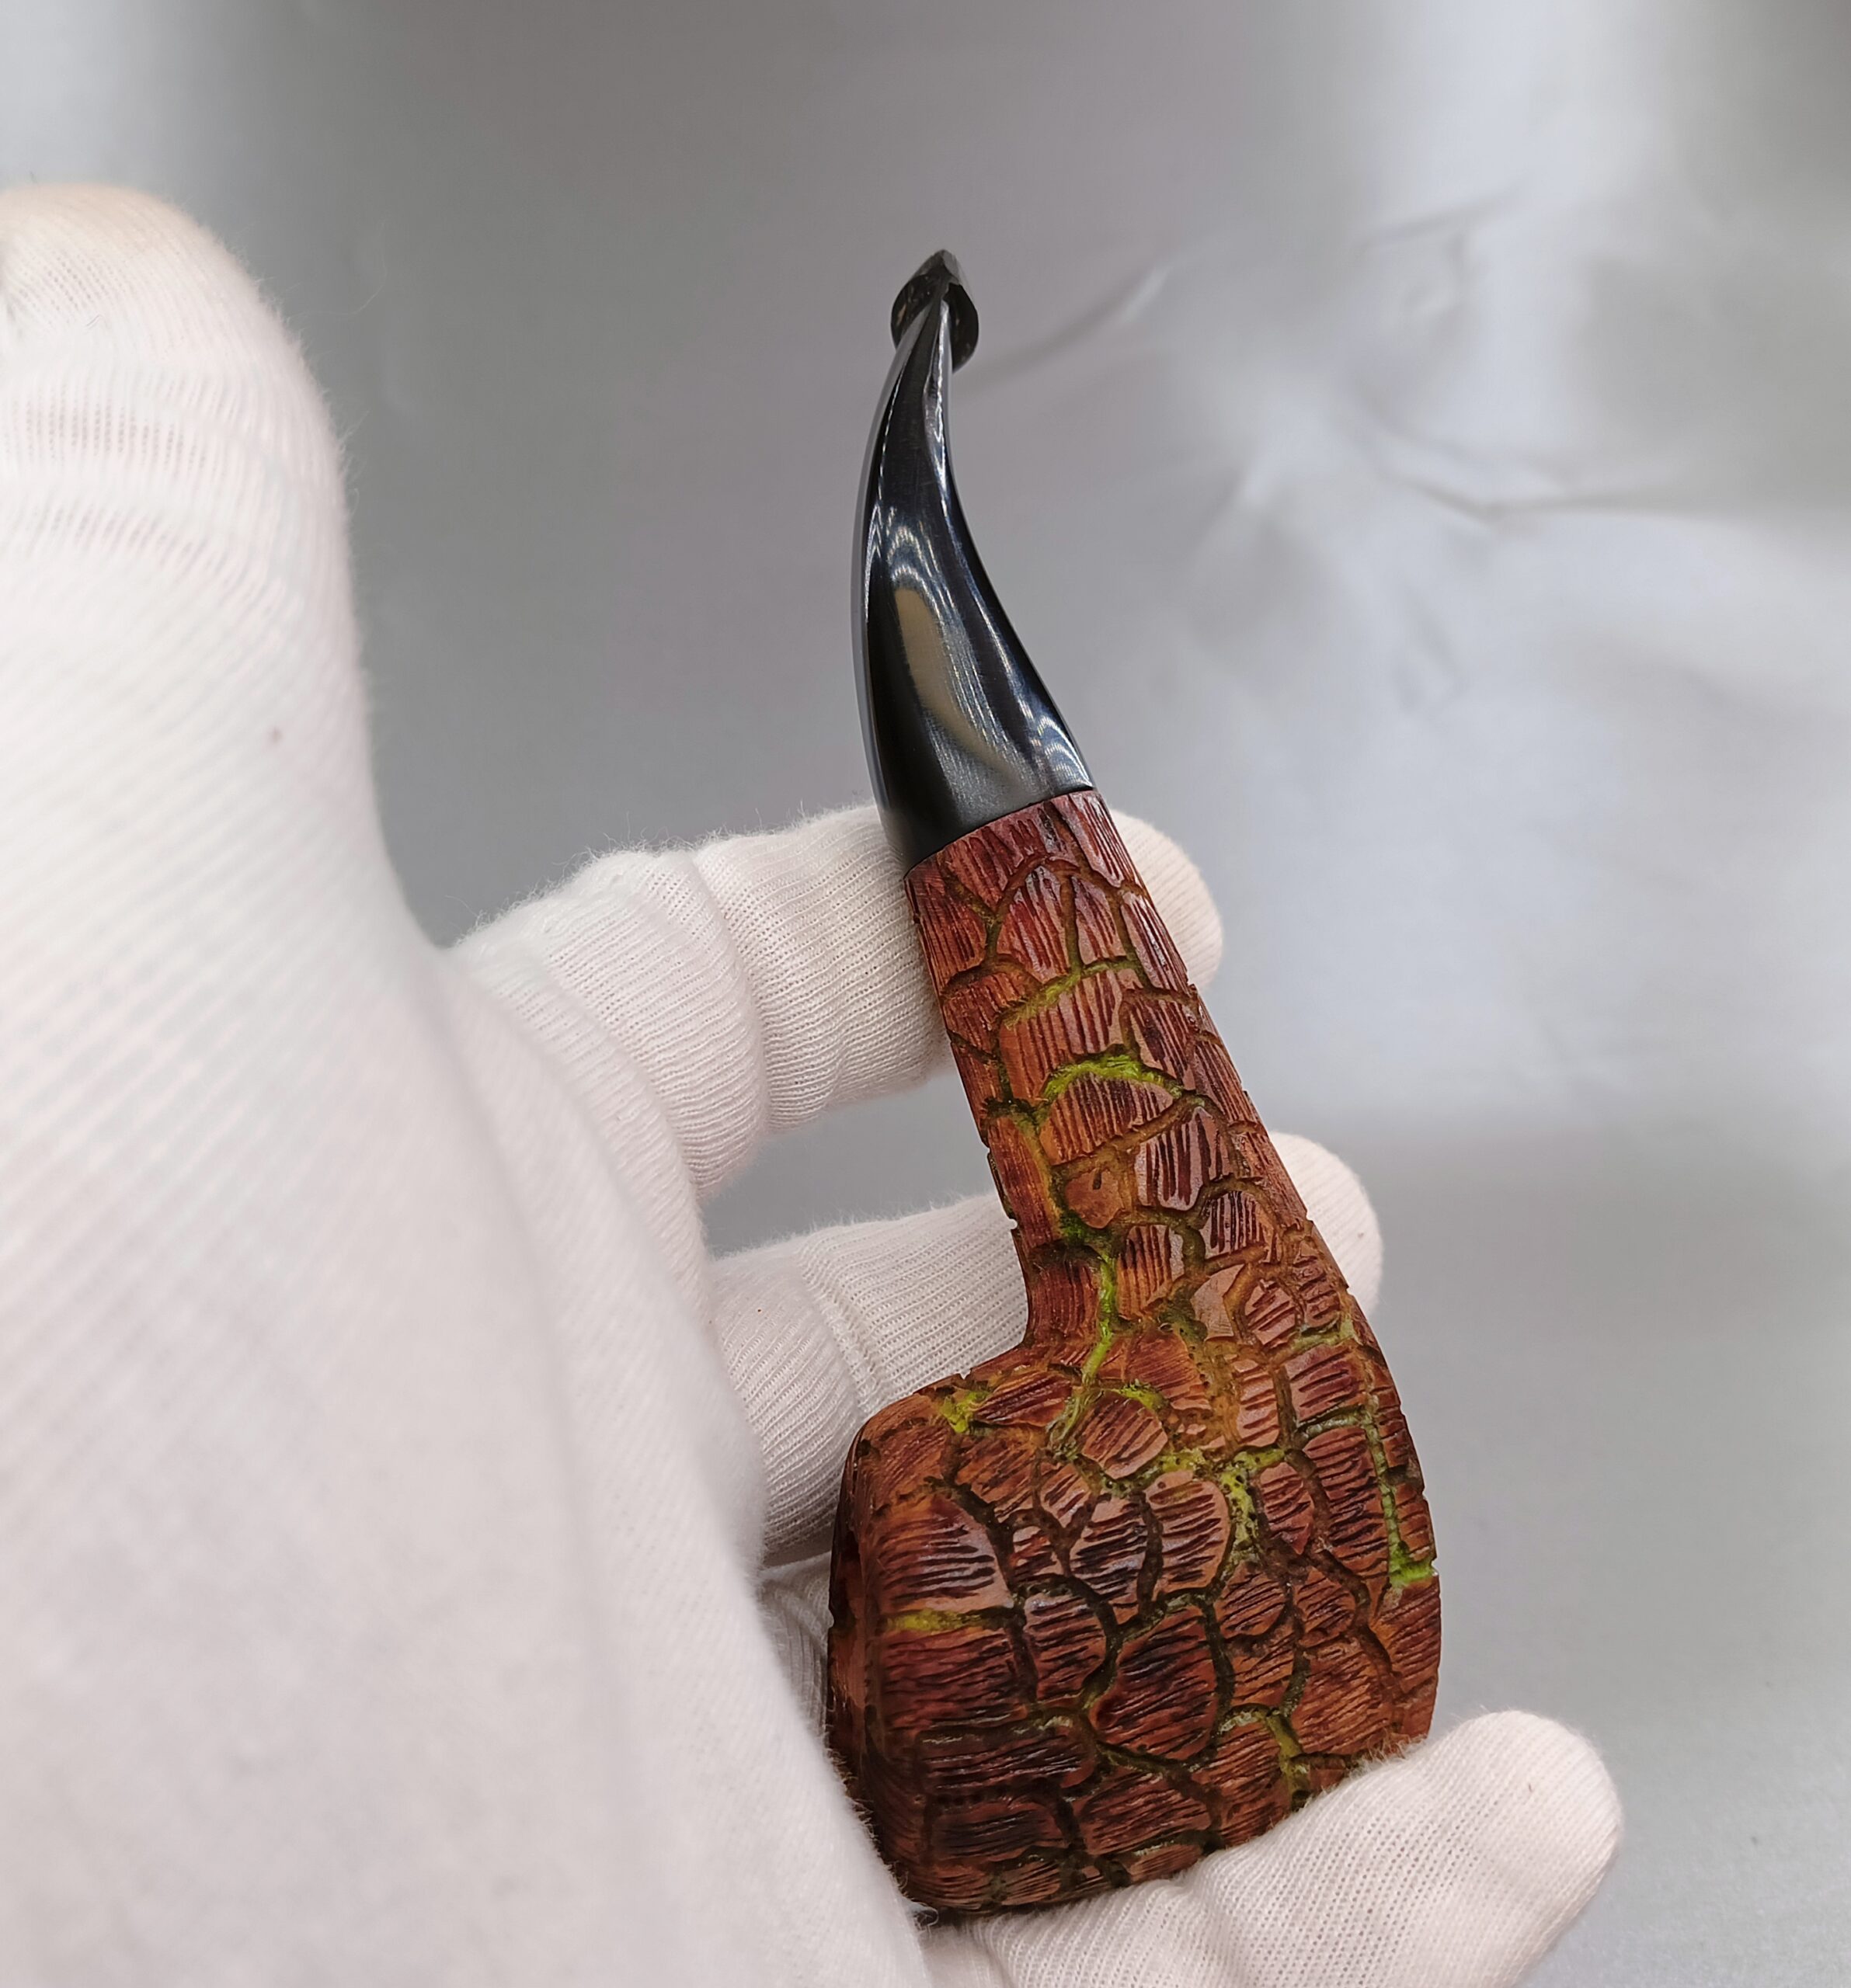 Briar Pipe Smoking Pipe Handmade by High Quality Briar Wood With